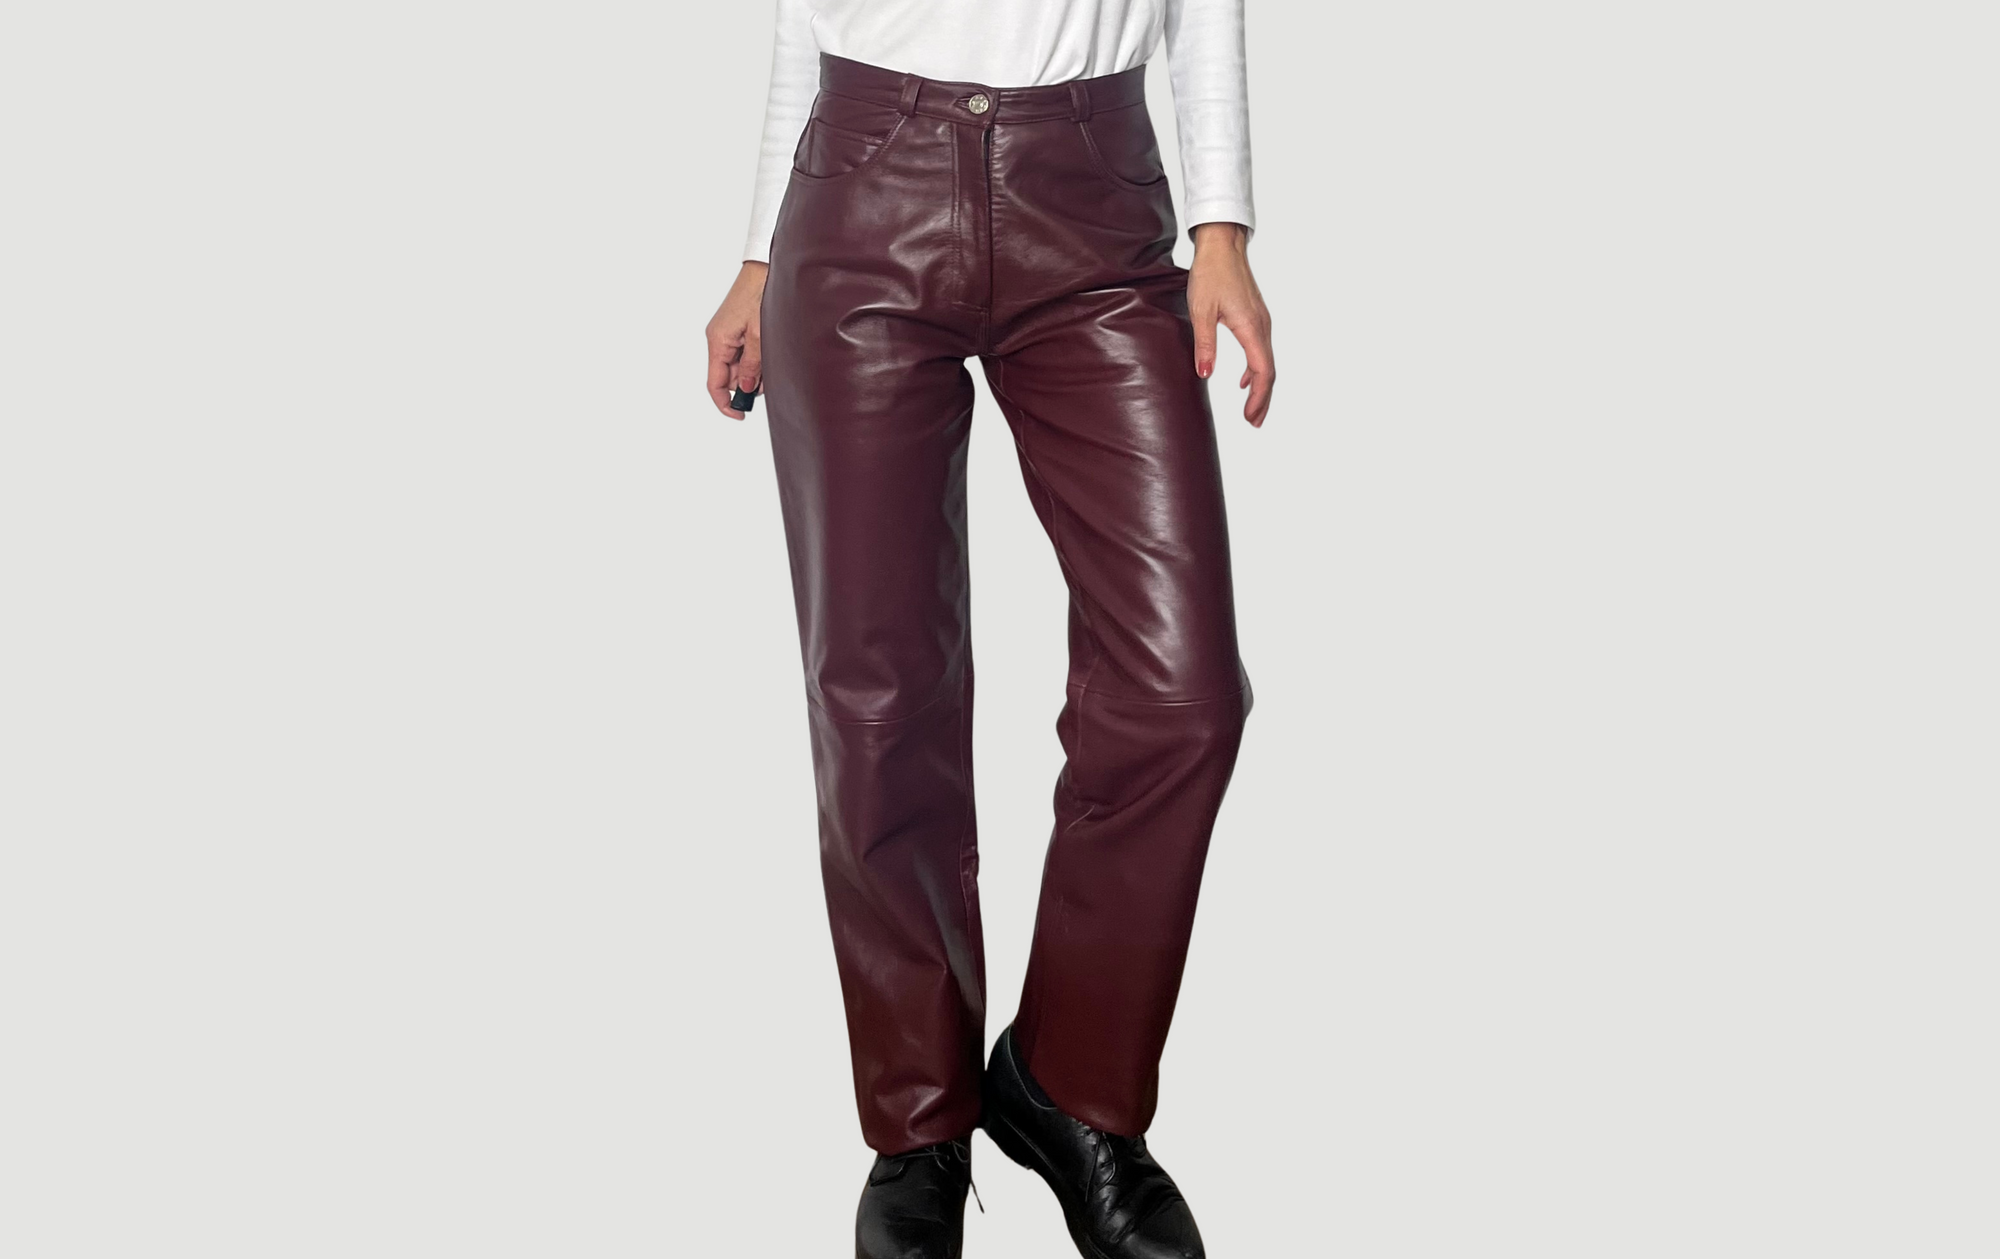 Burgundy Leather trousers